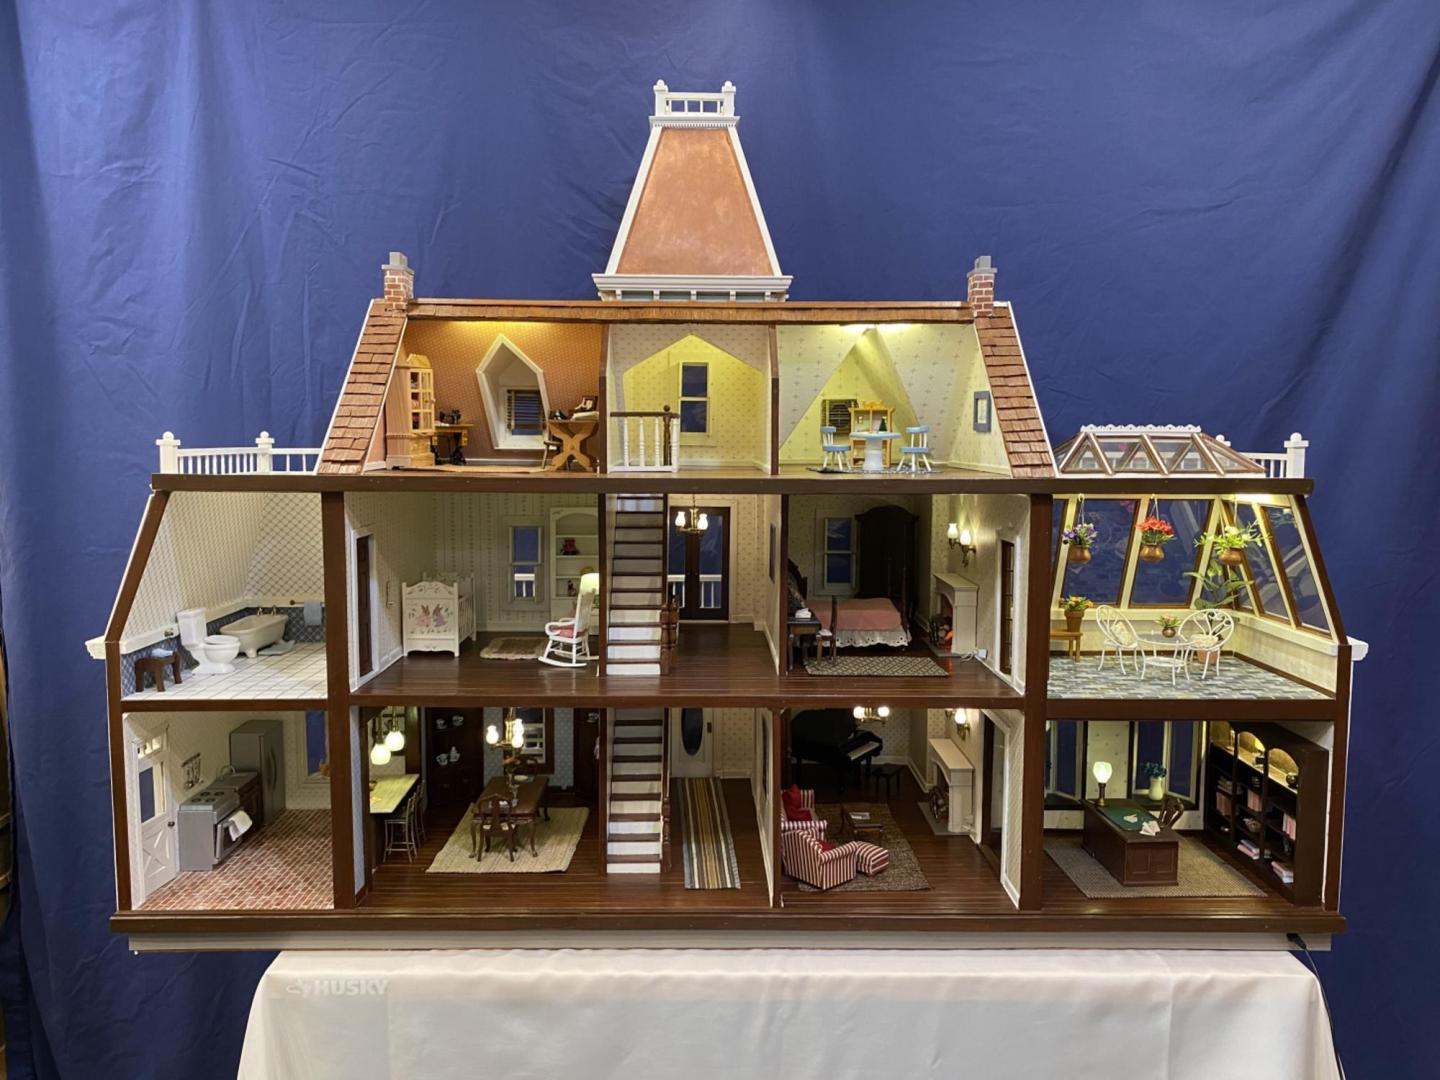 The Ewerts take great care in making custom furnishings for each dollhouses, even equipping them with electricity.